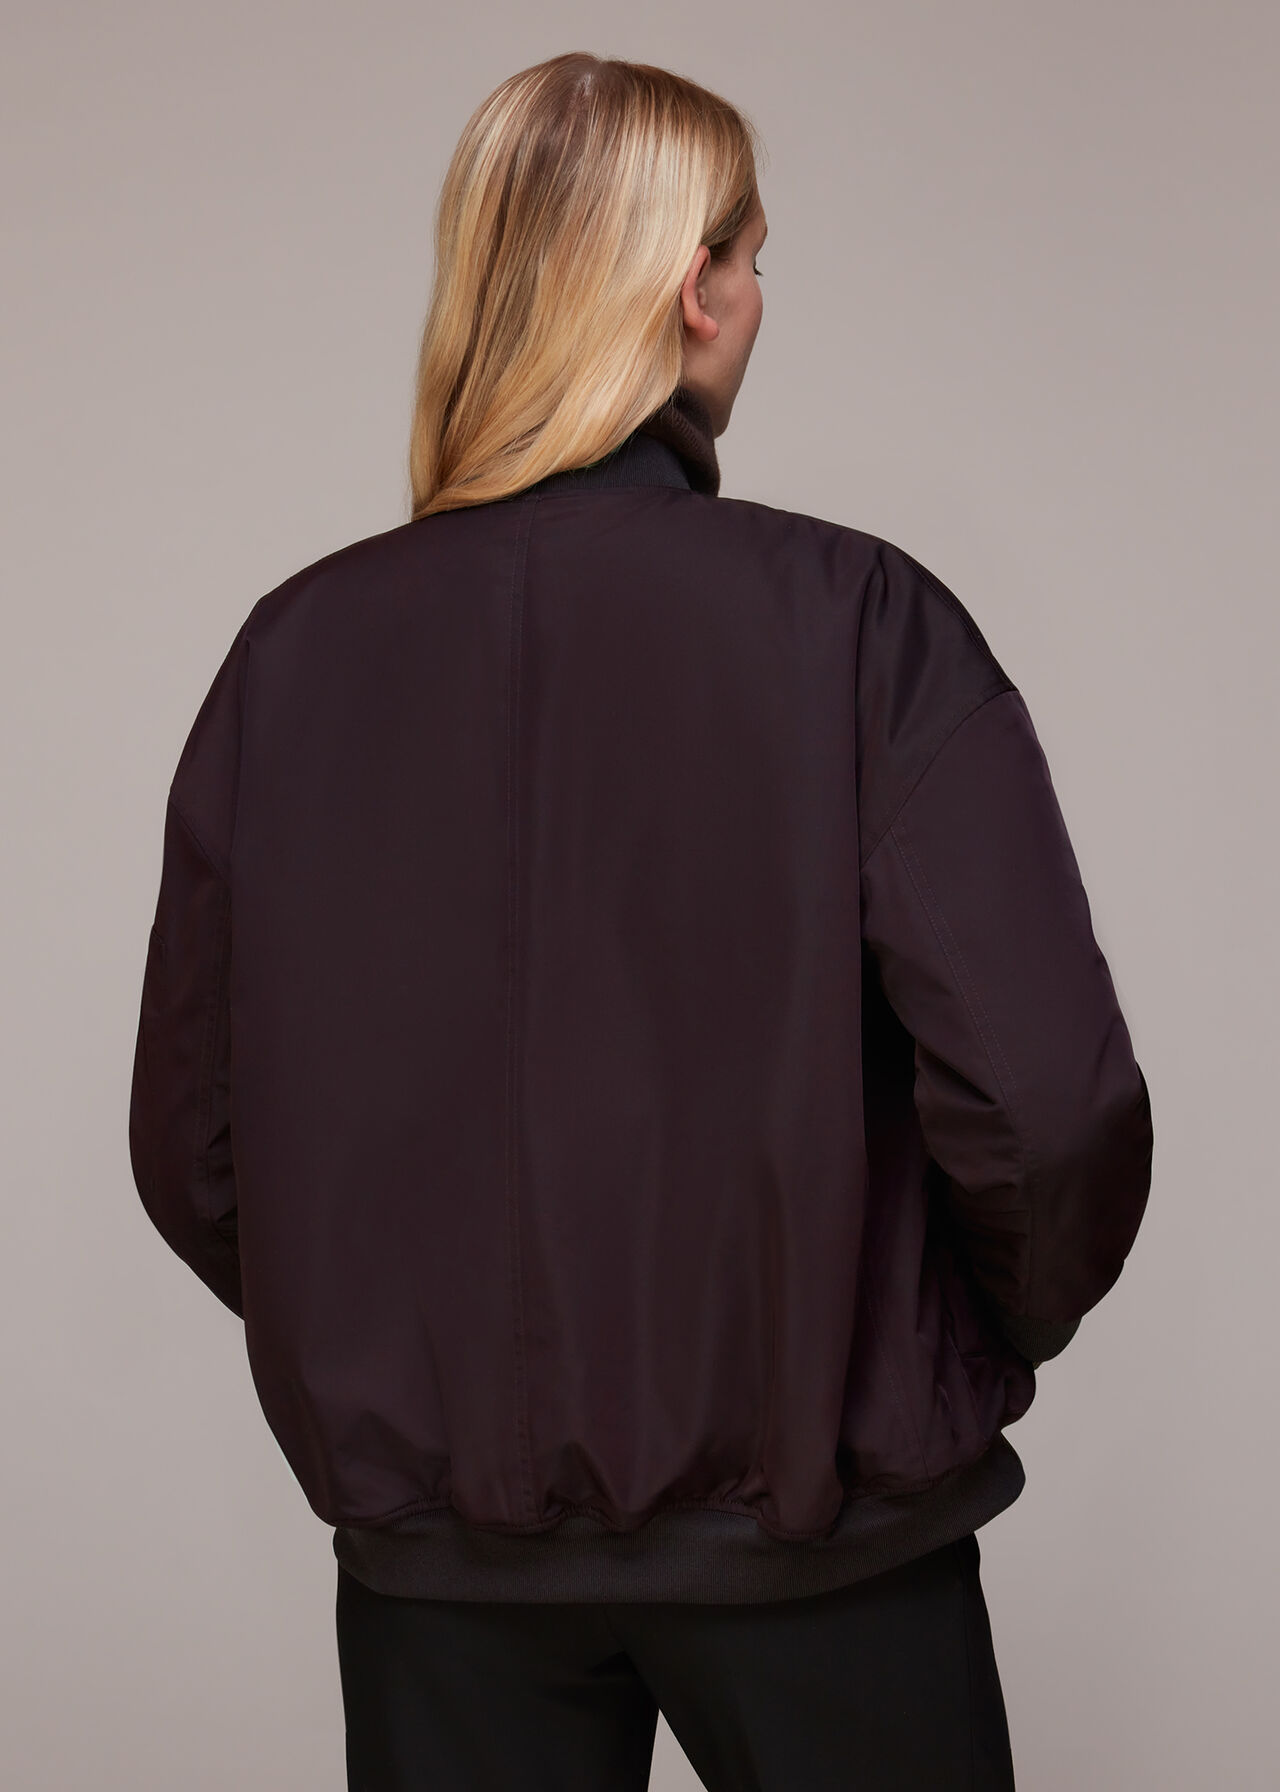 Brown Bomber Jacket in a Relaxed Fit with Side Pockets | Whistles ...